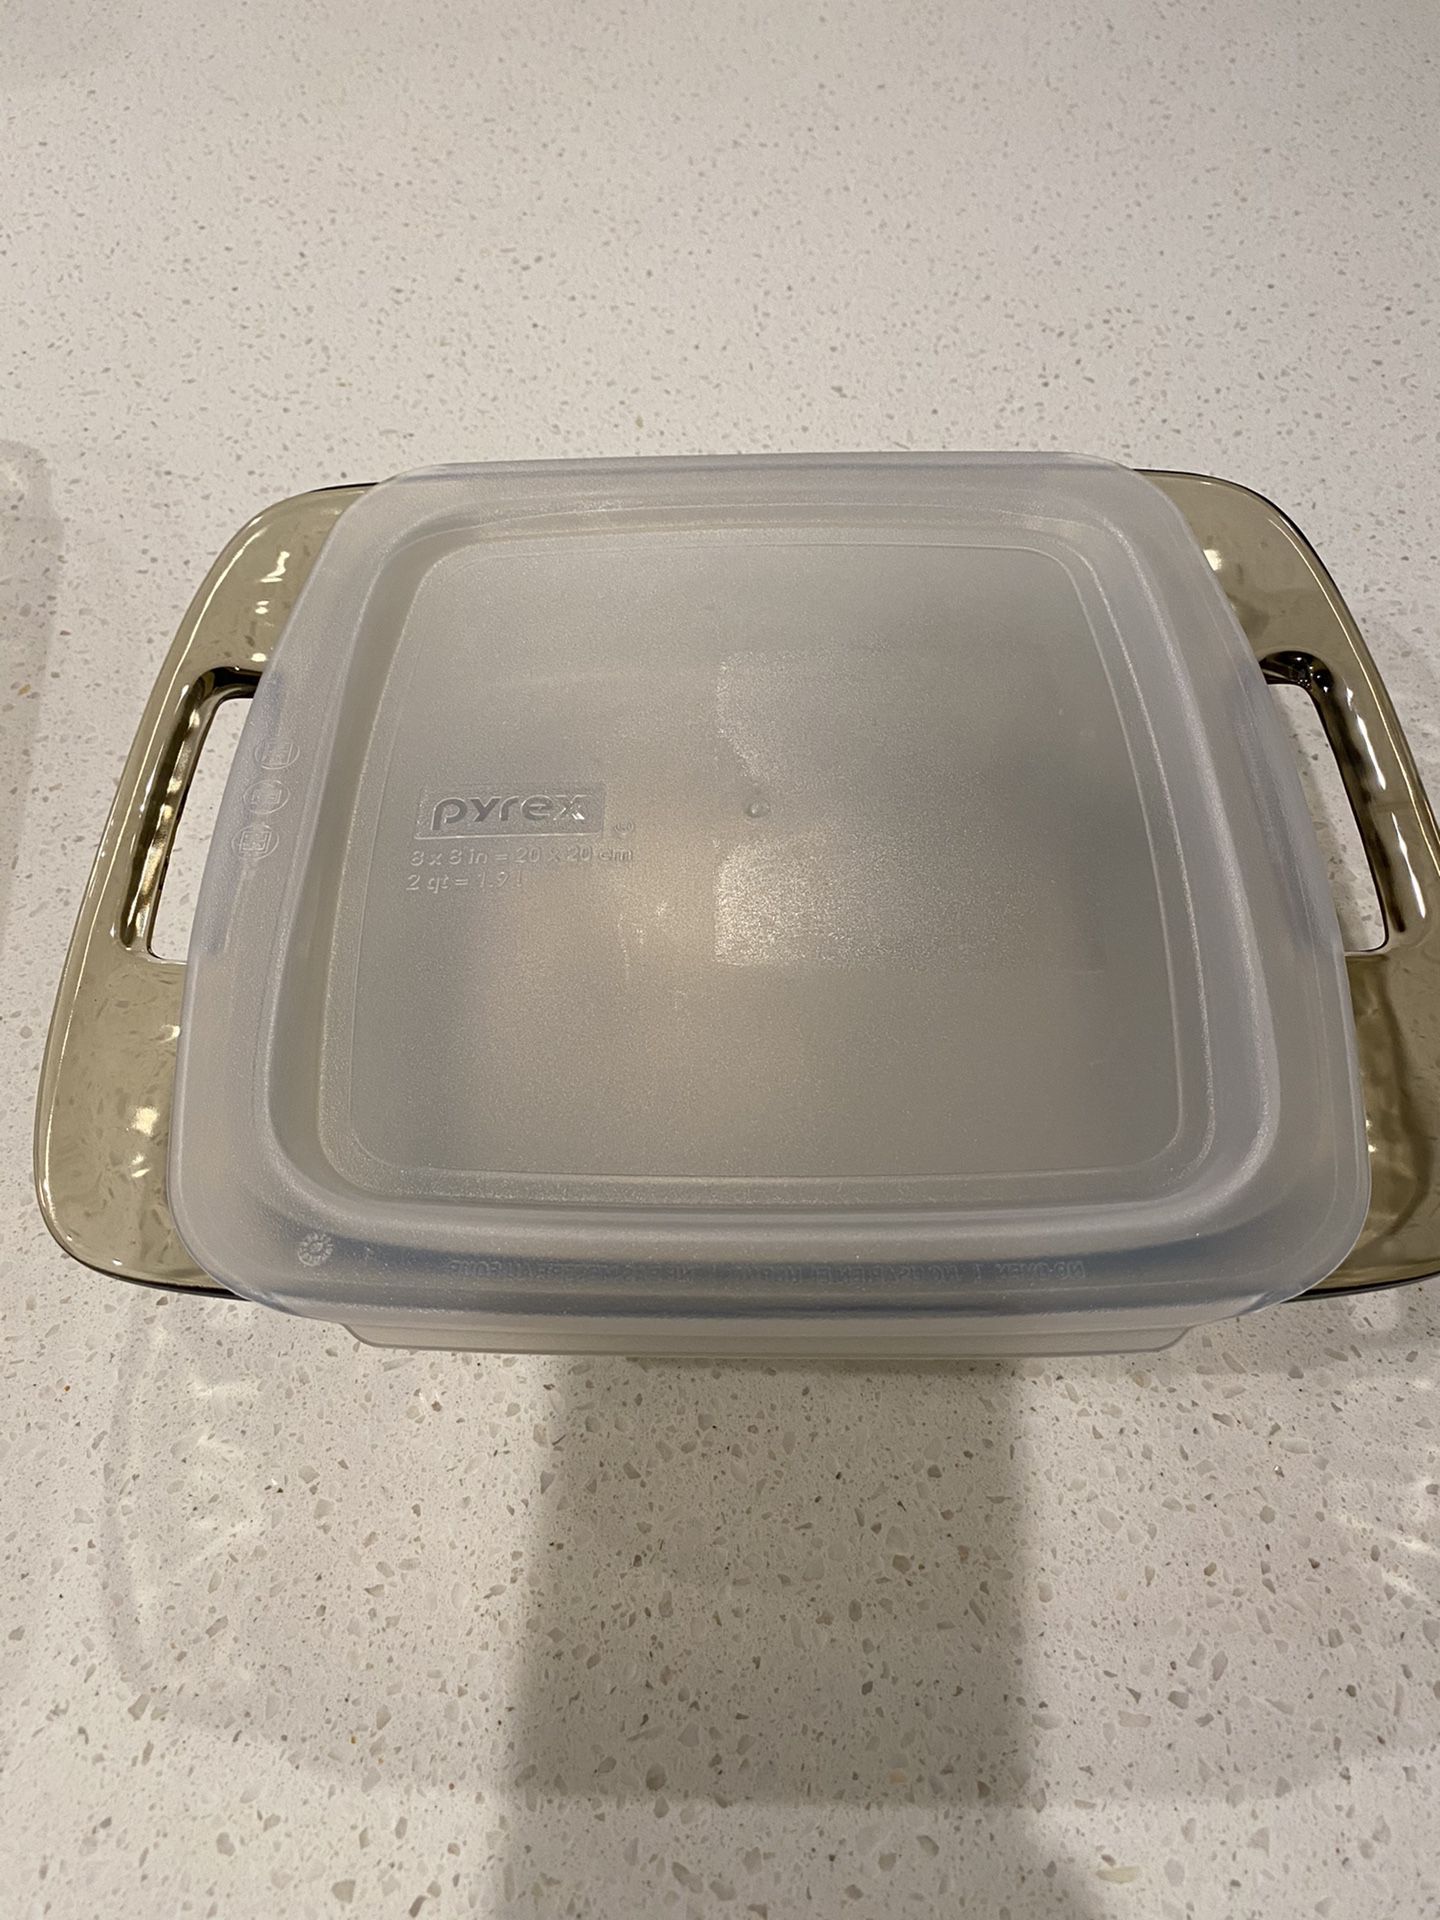 2 Pyrex Baking Dishes with lids